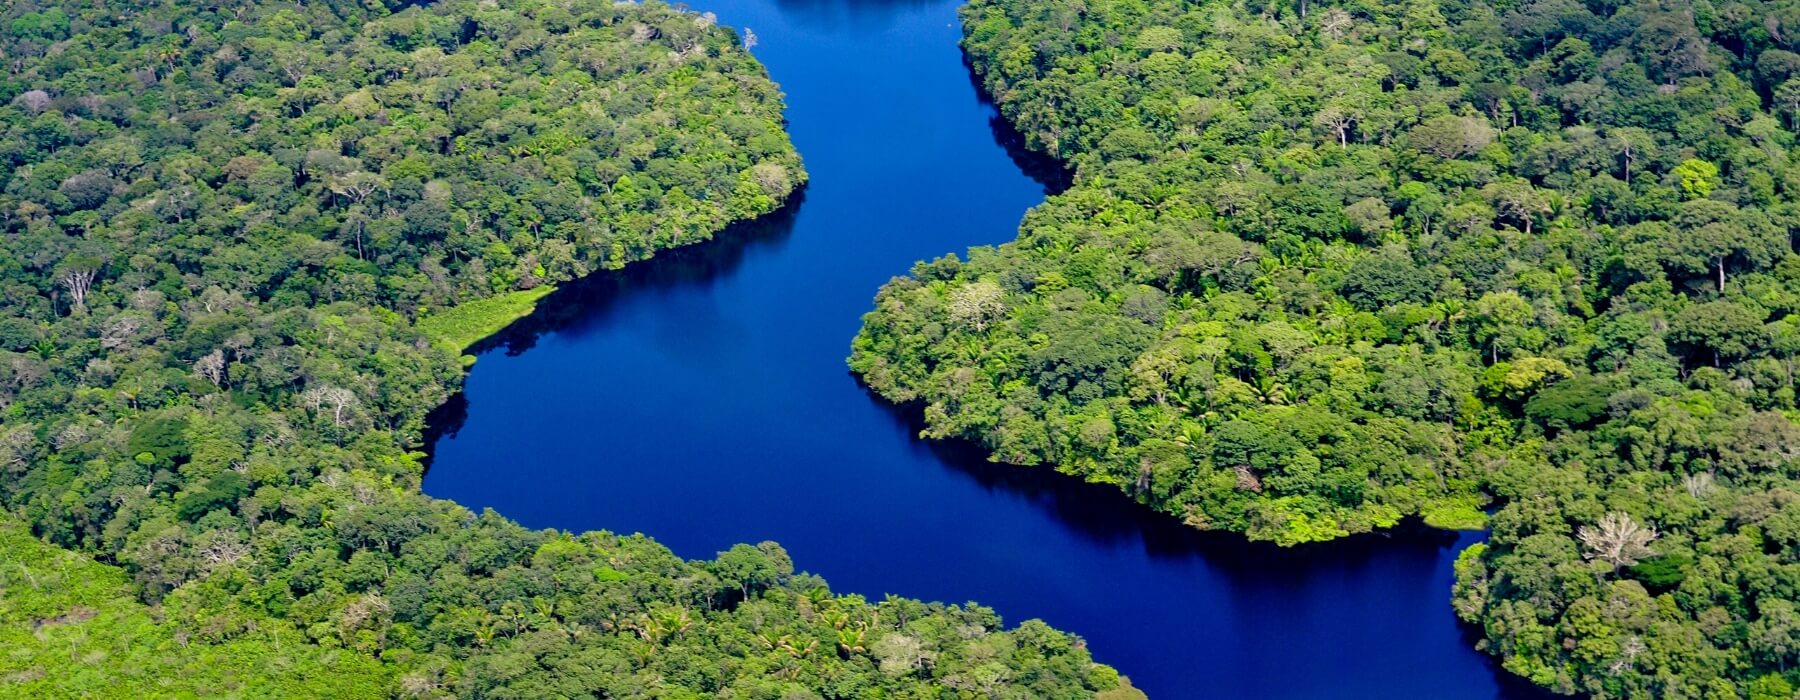 TOP FACTS ABOUT THE AMAZON  RAINFOREST